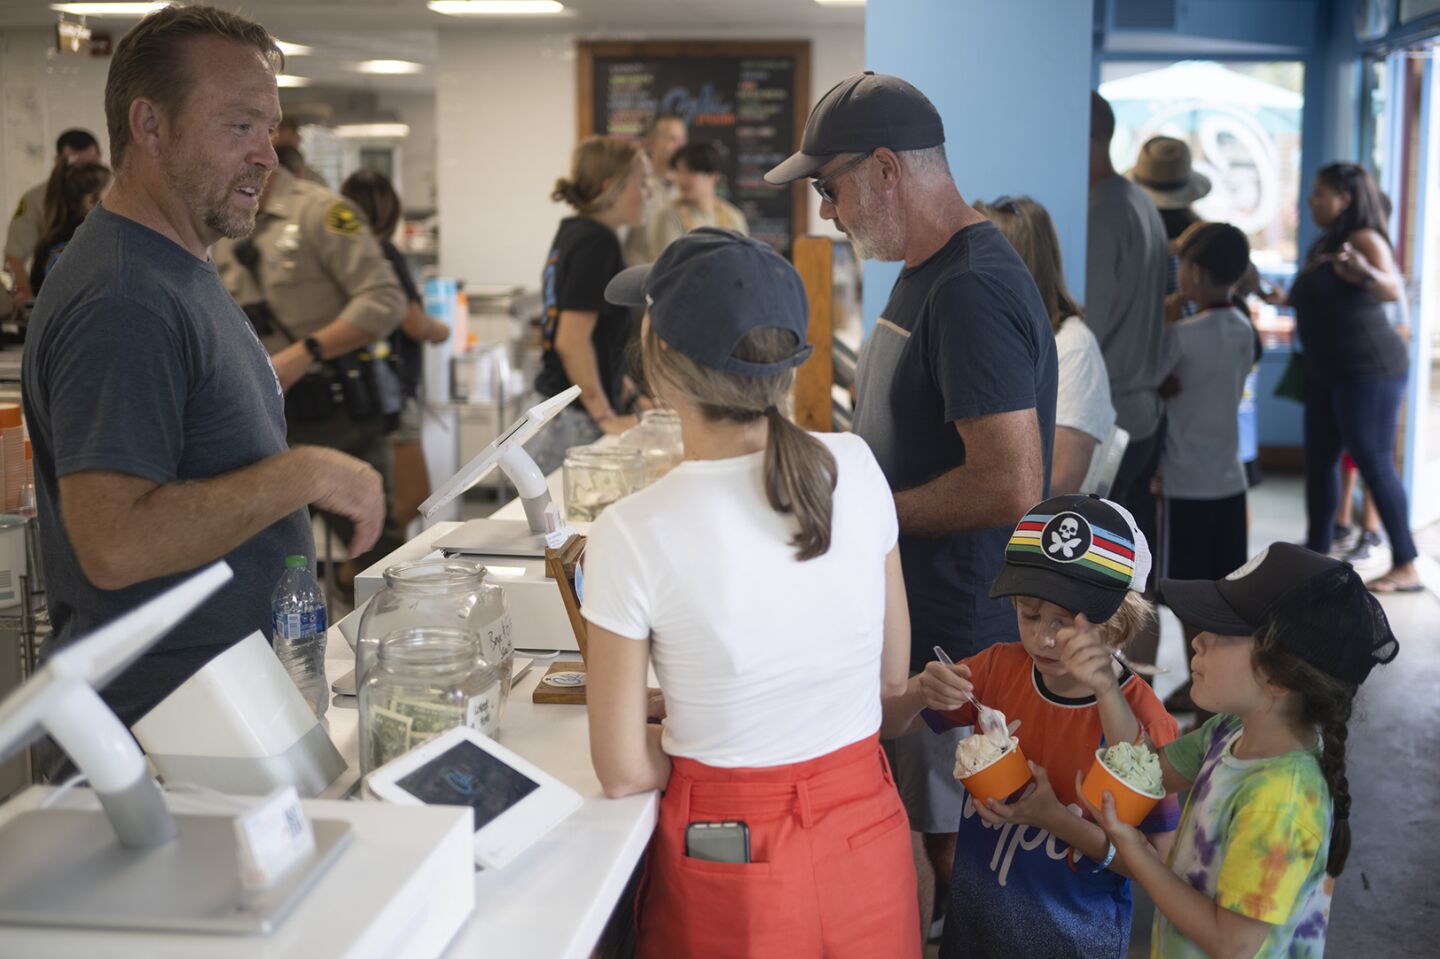 Cali Ice Cream owner Ken Schulenburg talks with the Young family